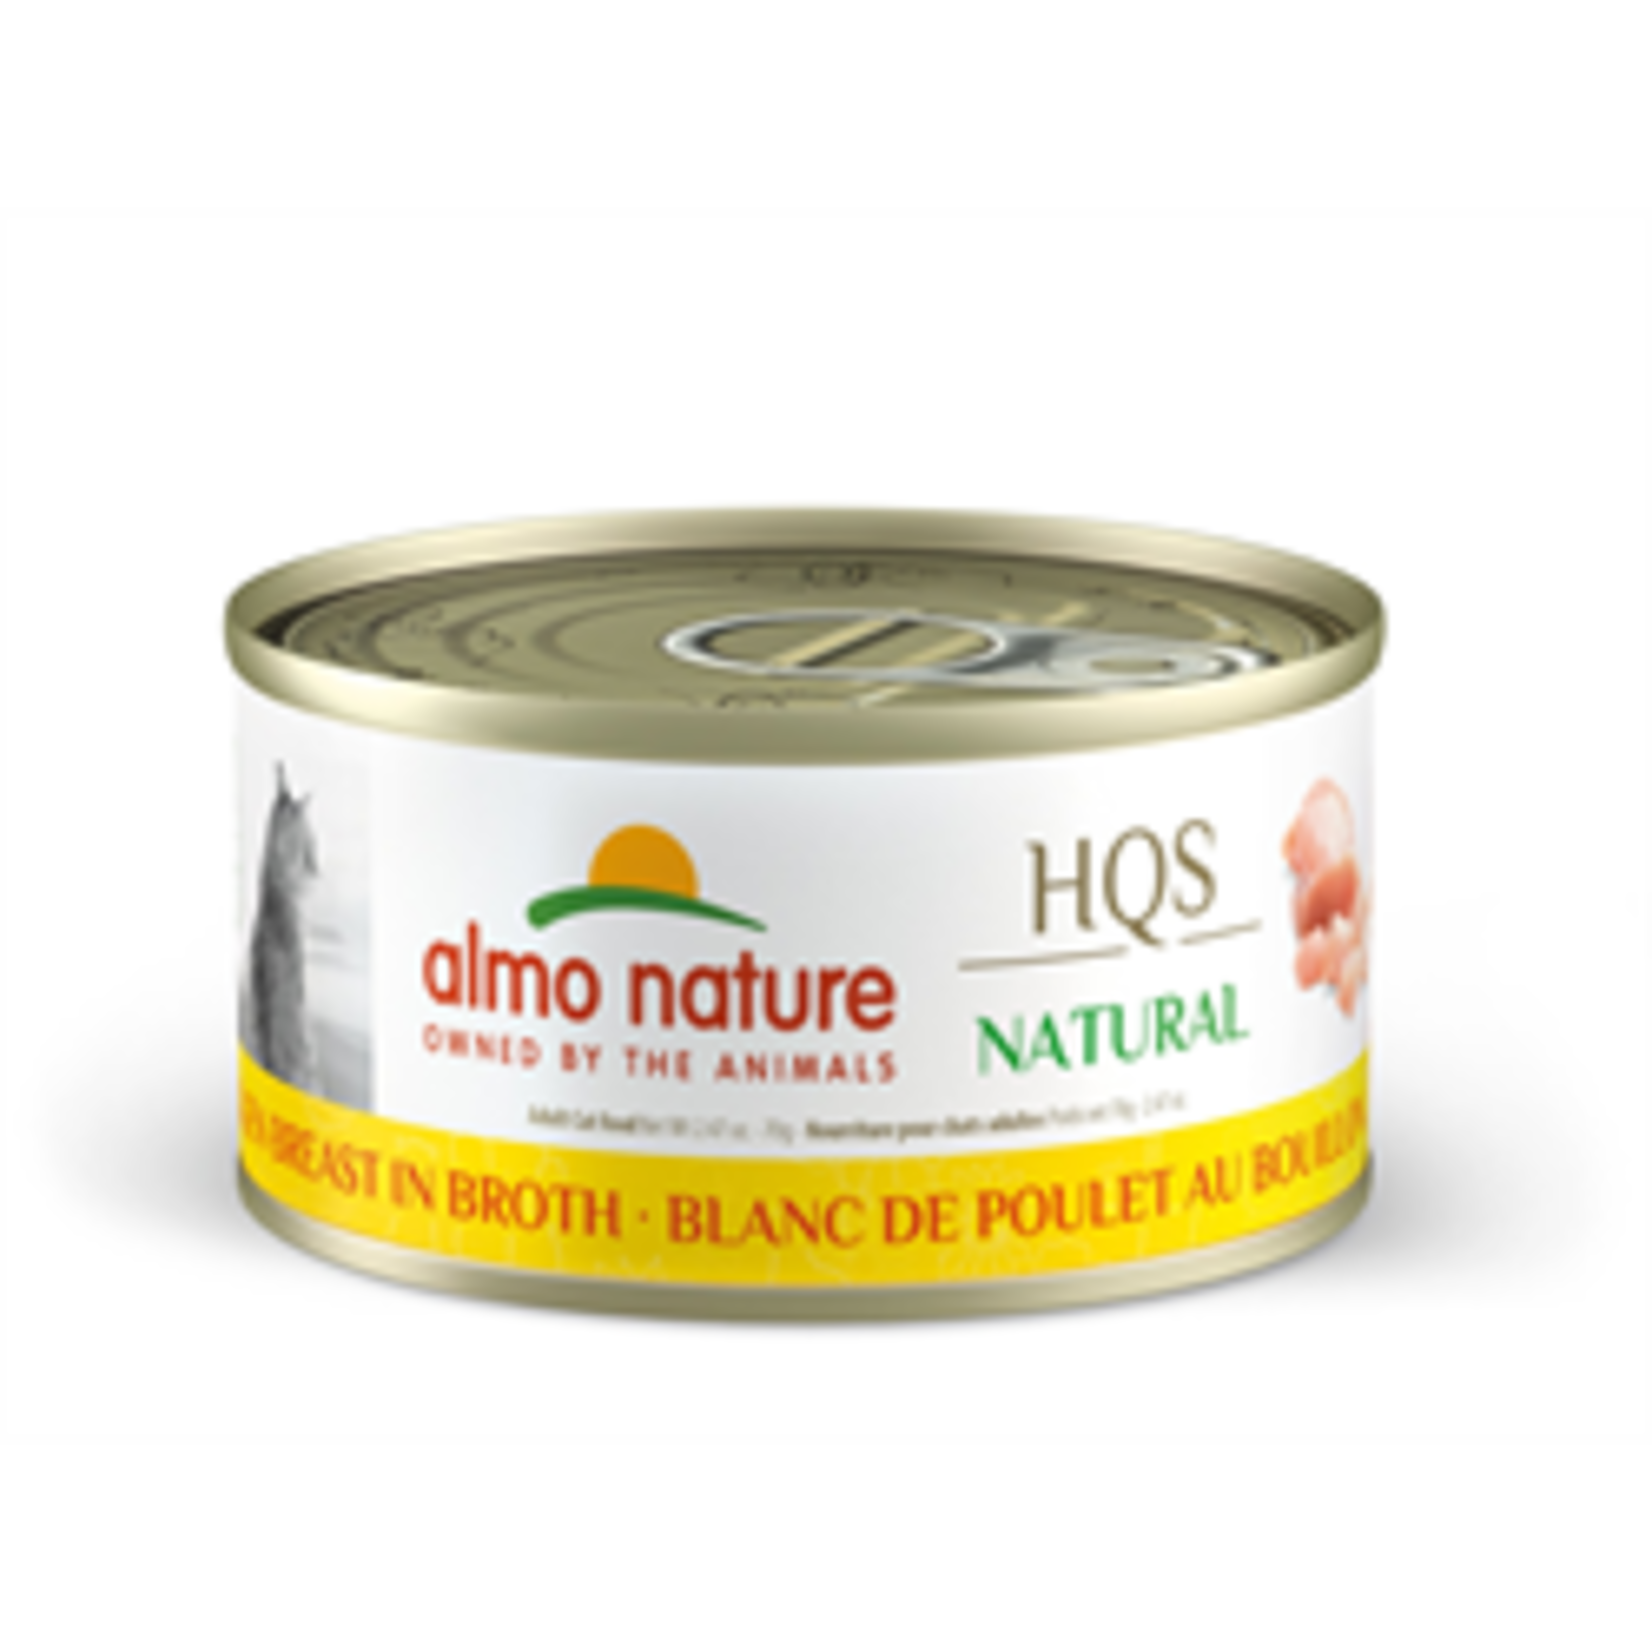 Almo Nature Almo Nature - HQS Naturals Canned Cat Food